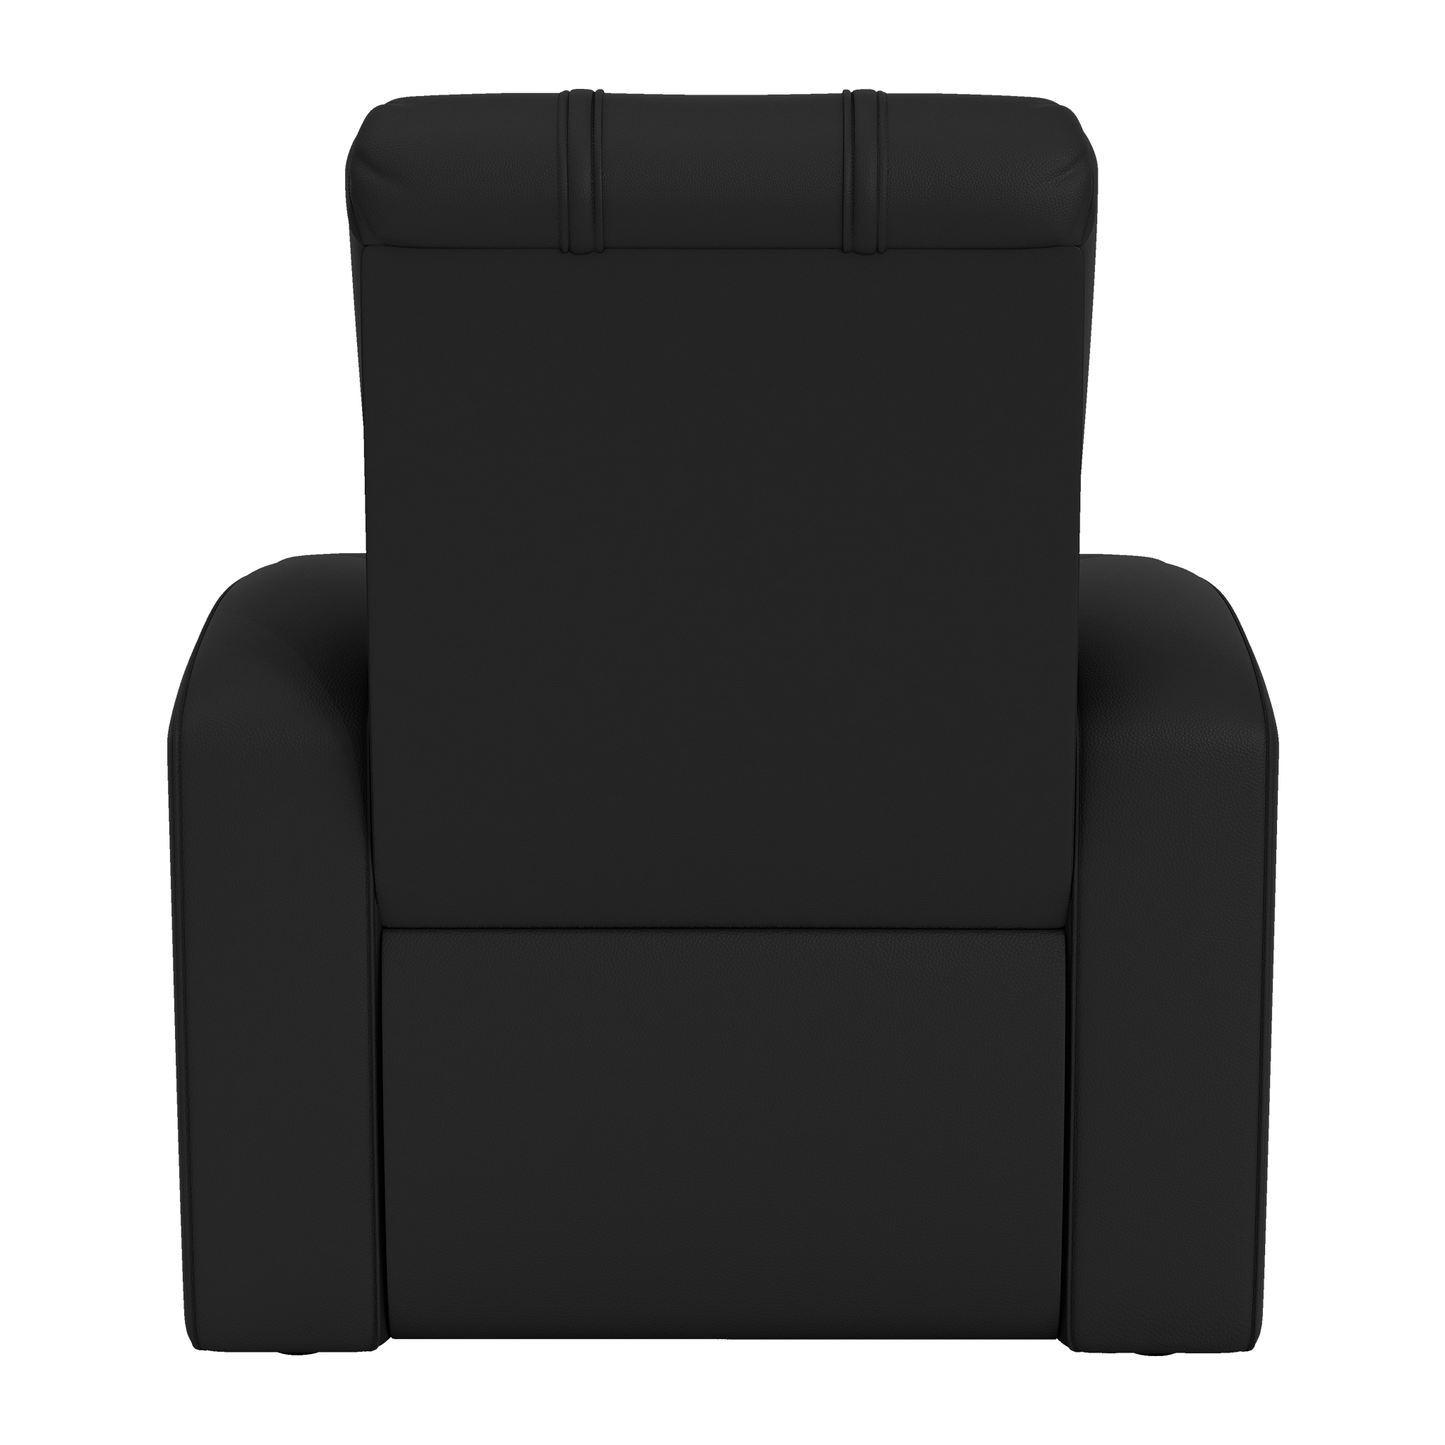 Relax Home Theater Recliner with Los Angeles FC Logo